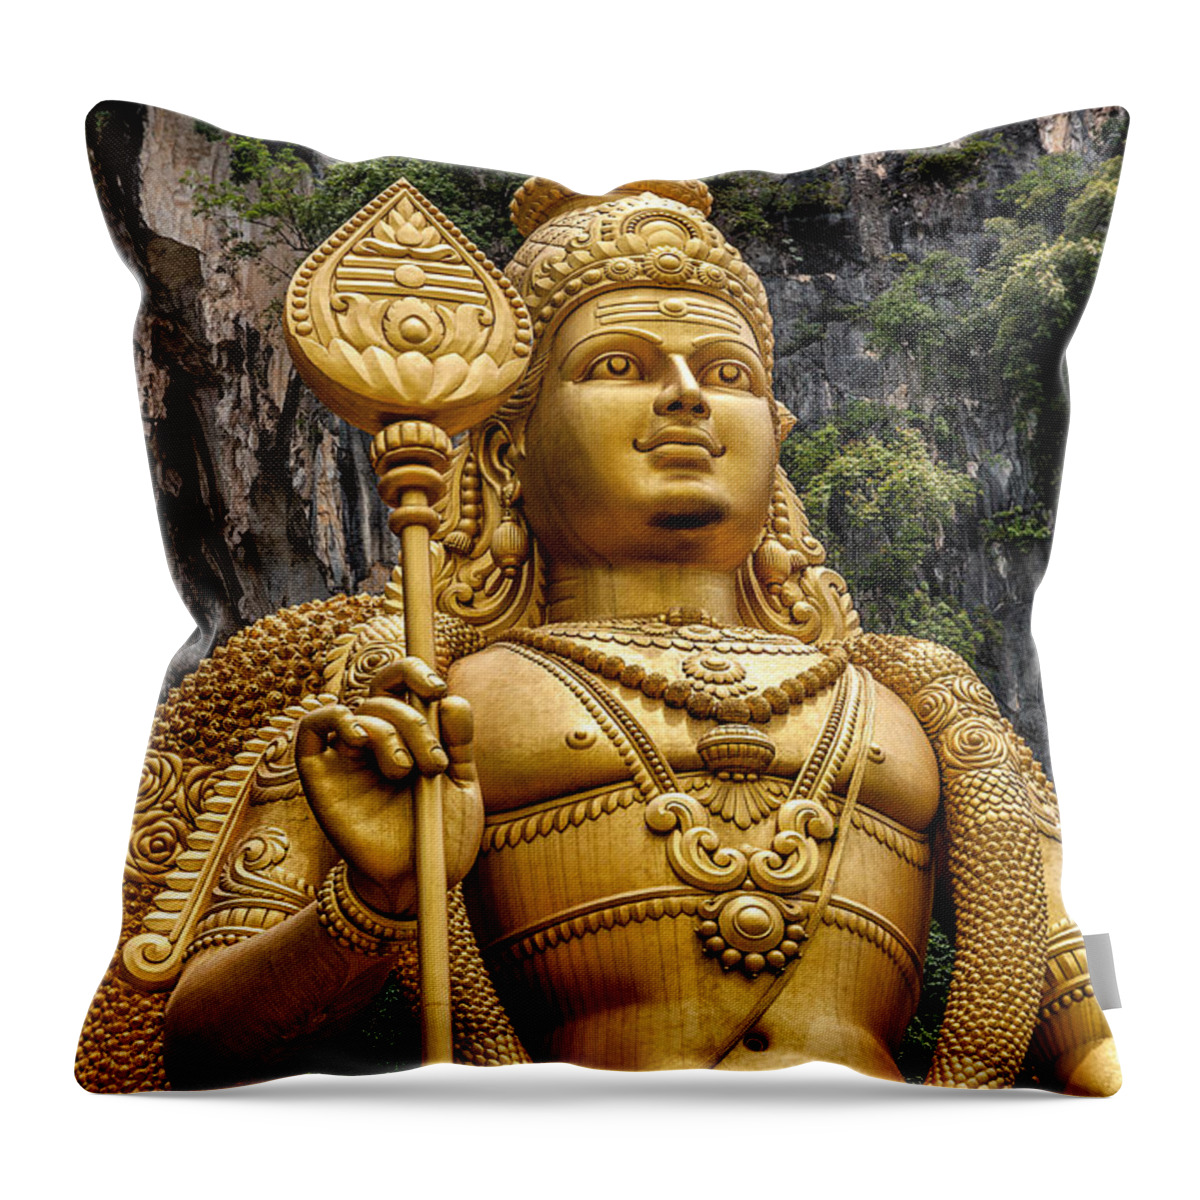 Lord Murugan Throw Pillow featuring the photograph Lord Murugan by Adrian Evans